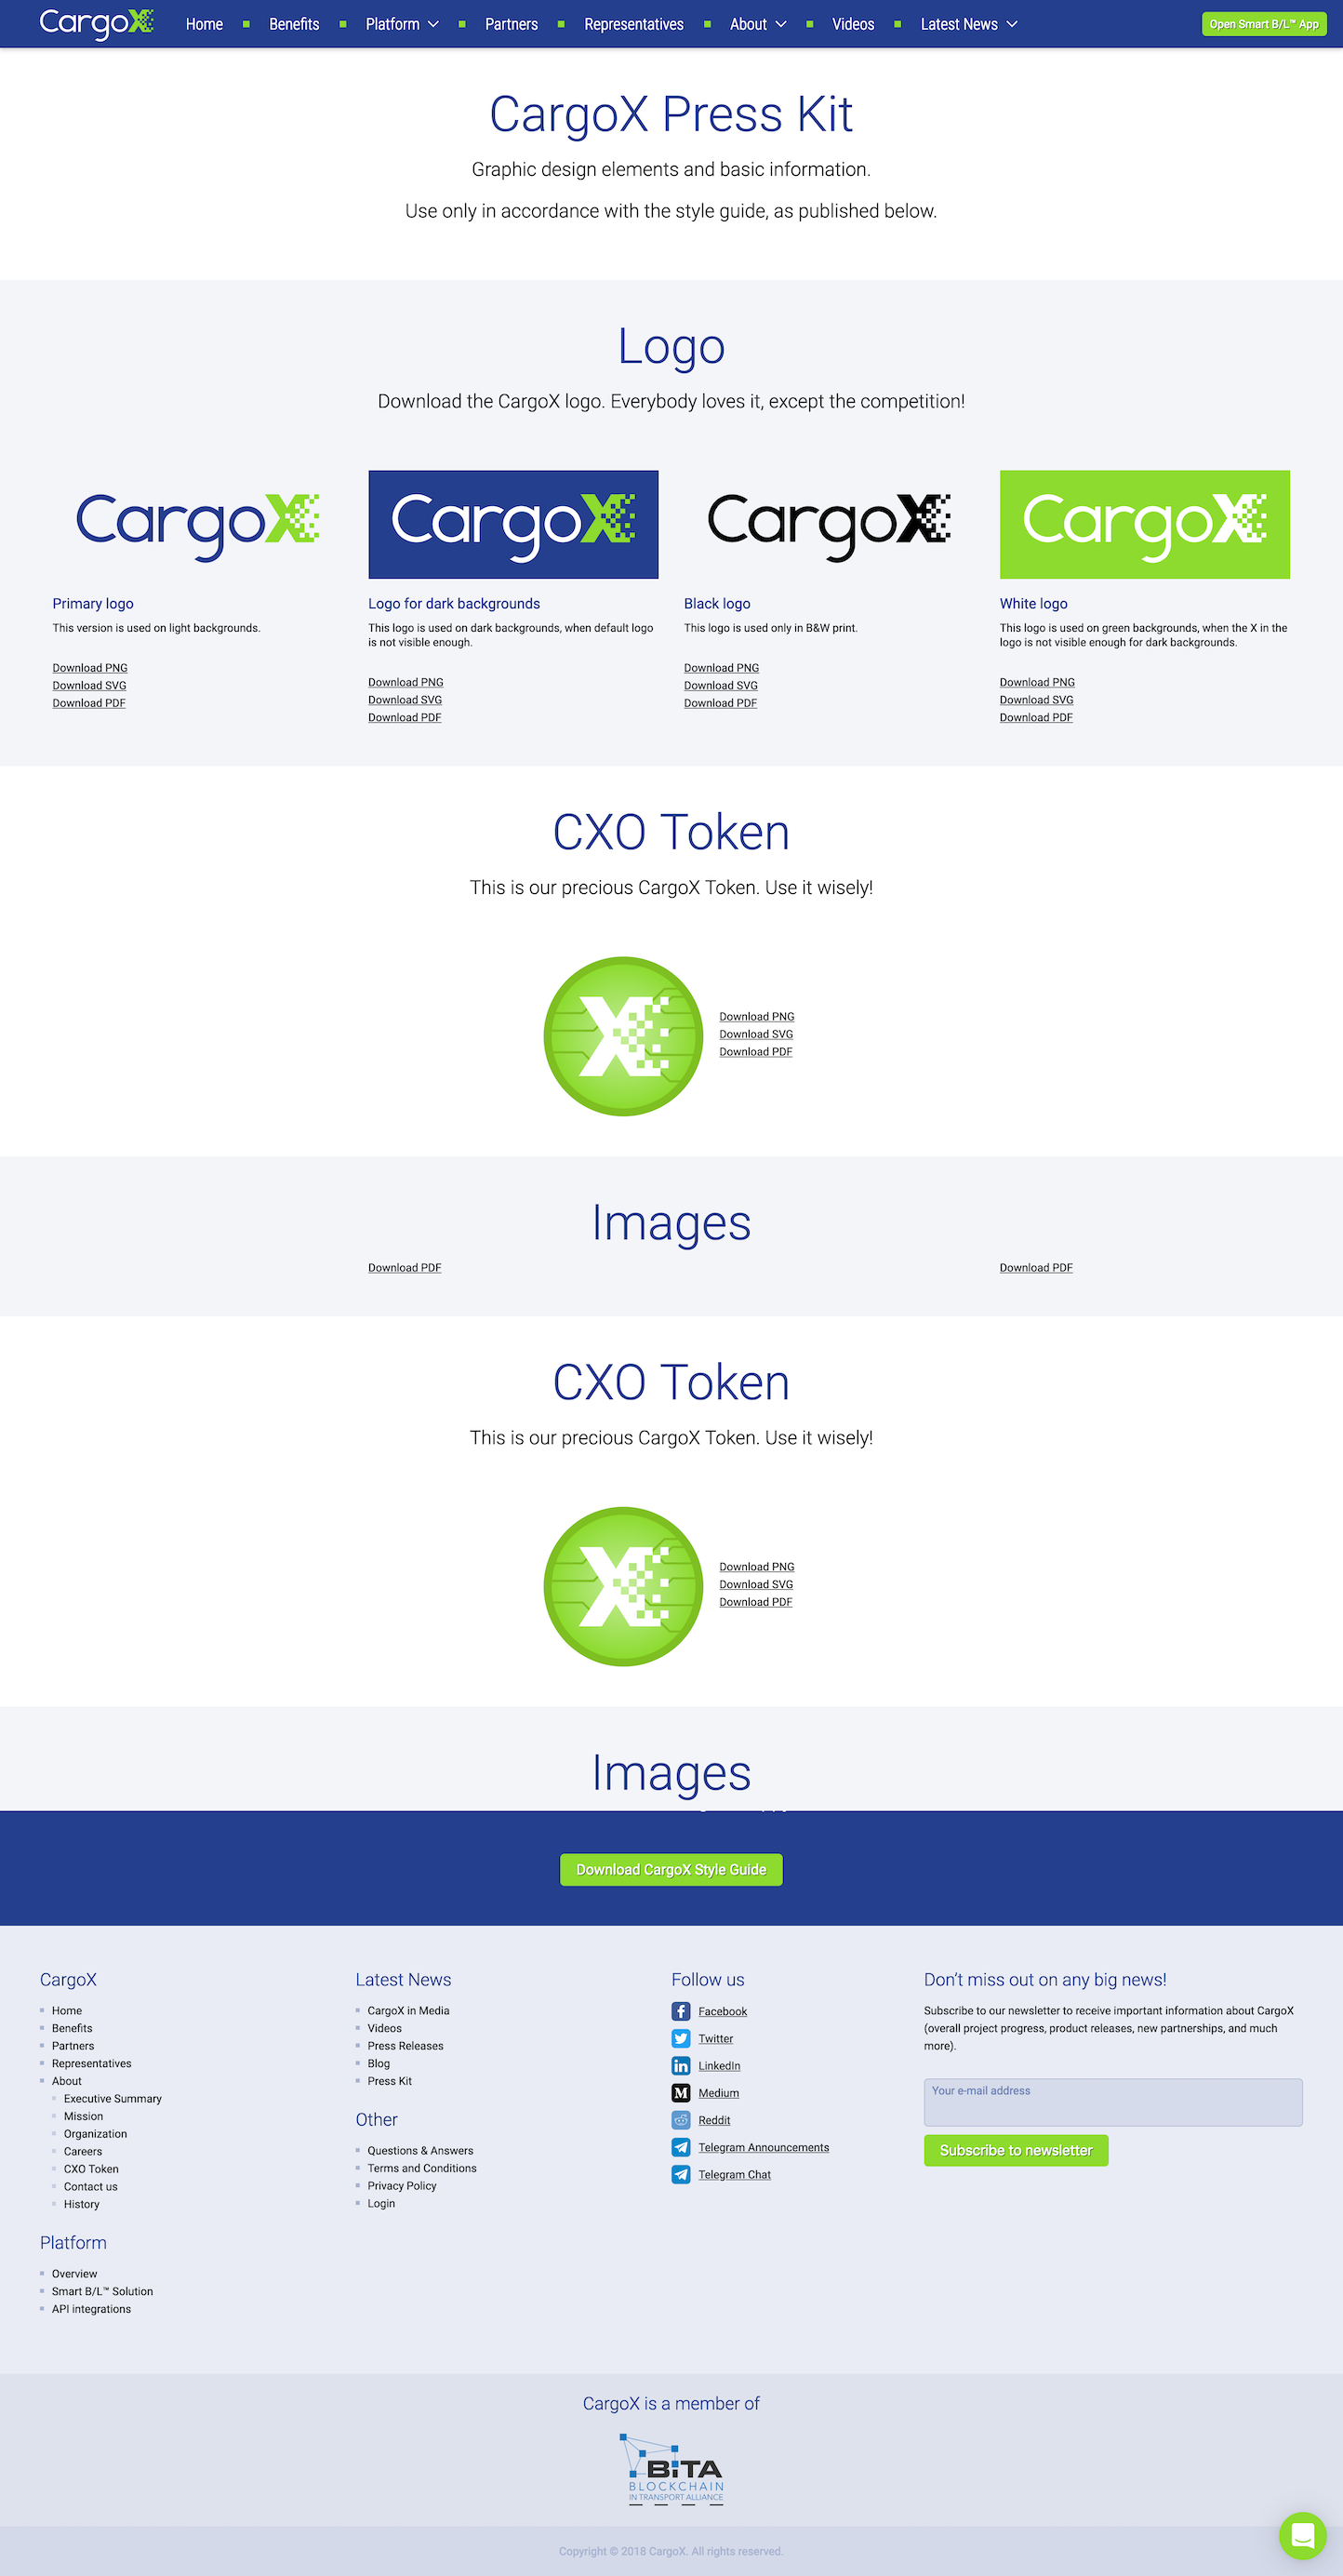 Screenshot of the Brand Guidelines page from the CargoX website.